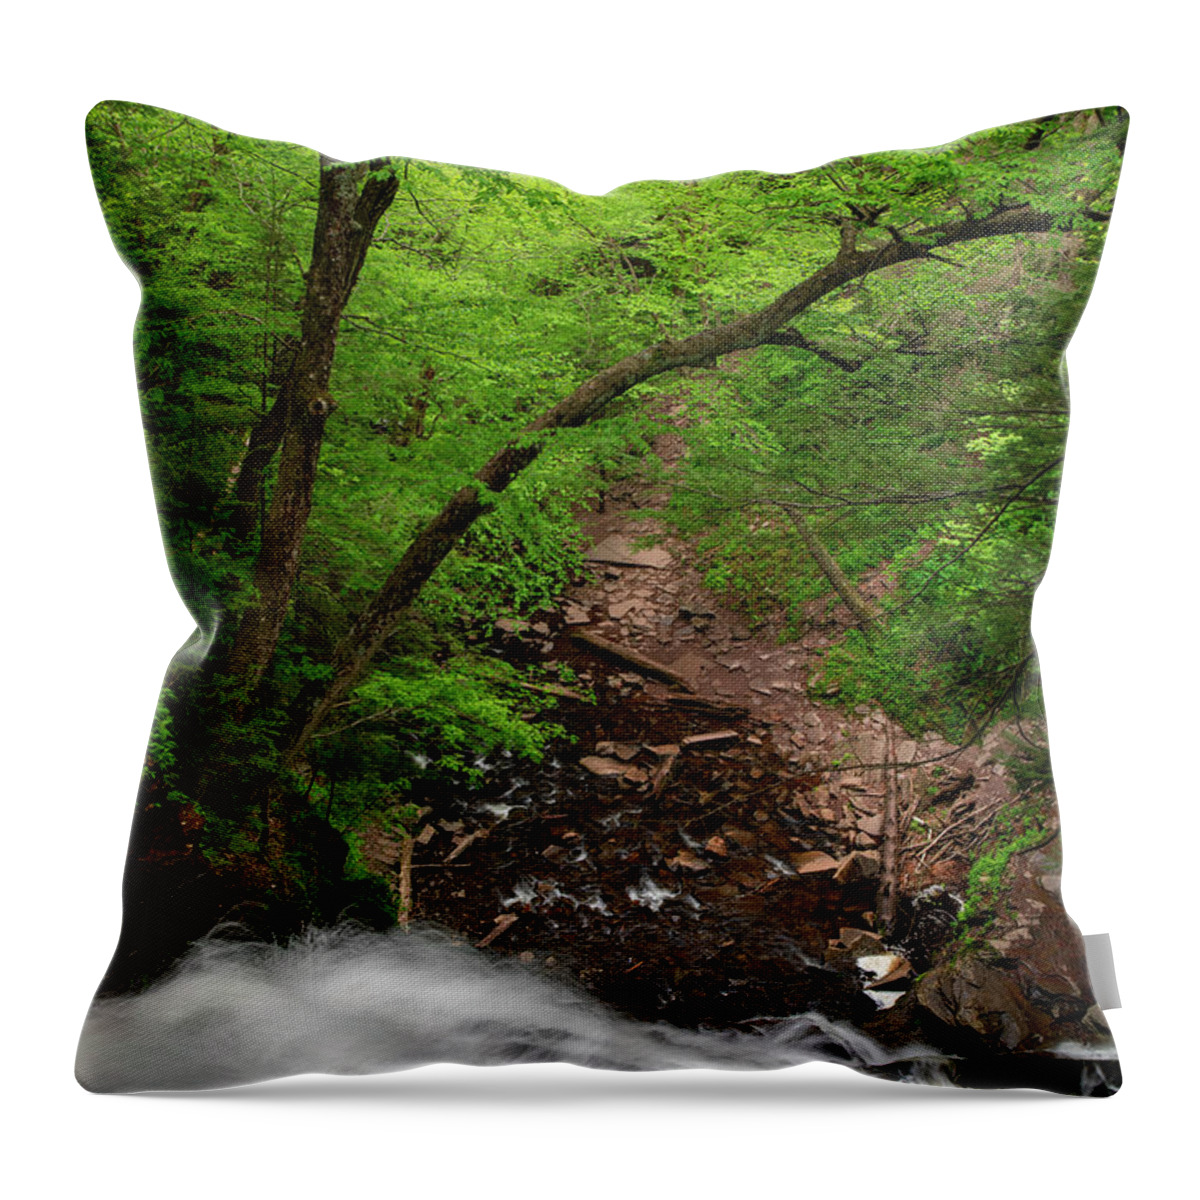 Looking Down Ricketts Glen Waterfall Throw Pillow featuring the photograph Looking Down Ricketts Glen Waterfall by Dan Sproul